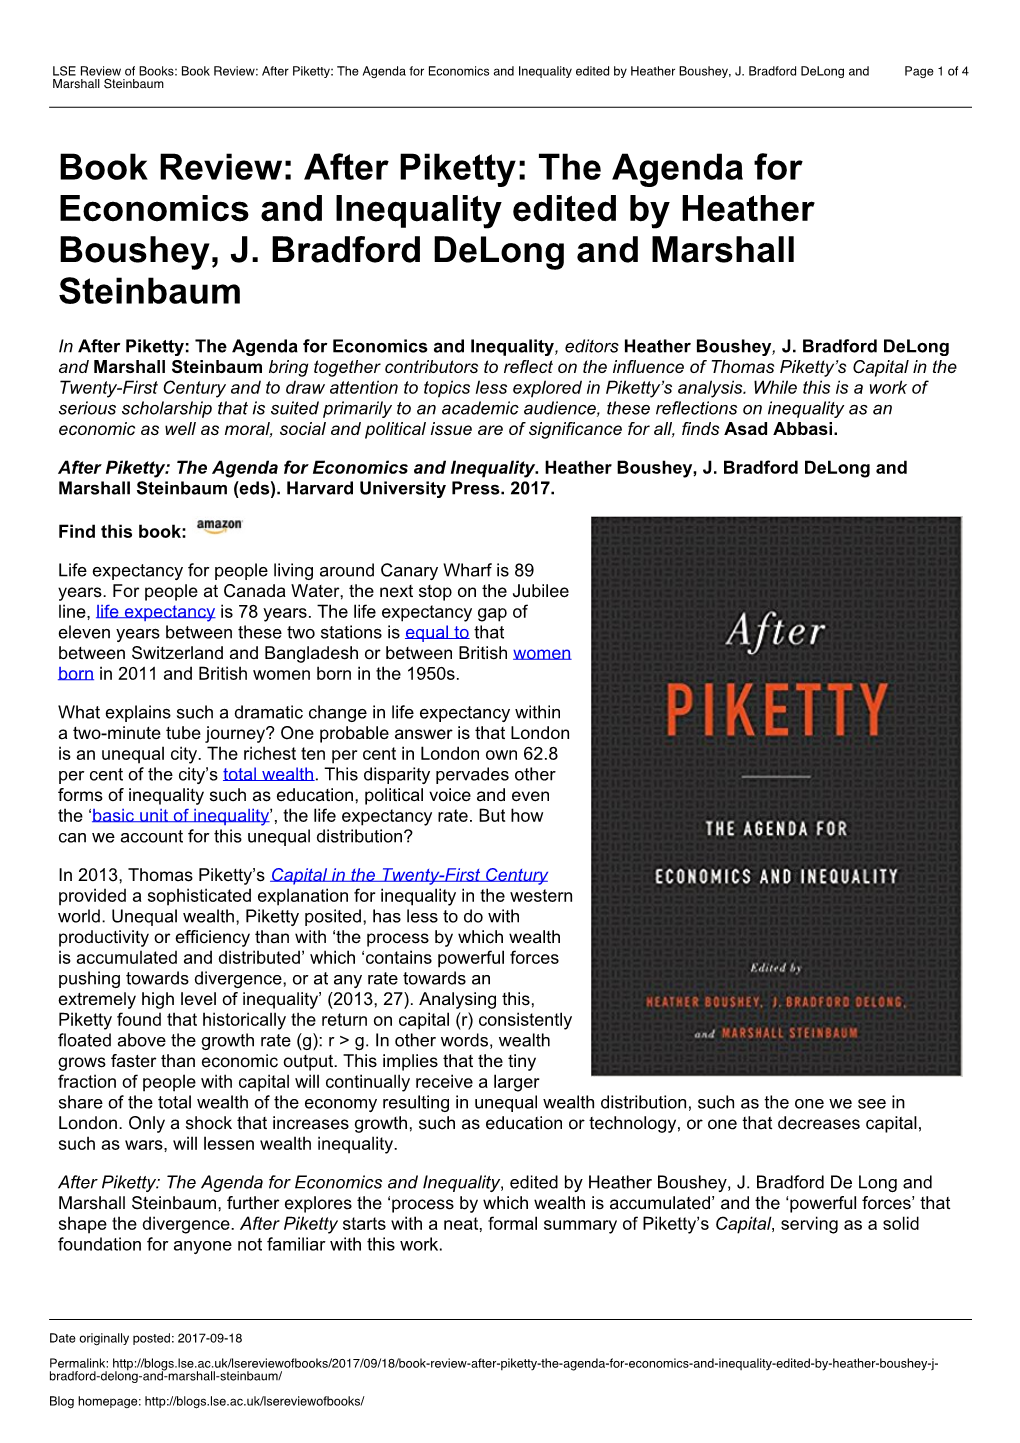 After Piketty: the Agenda for Economics and Inequality Edited by Heather Boushey, J